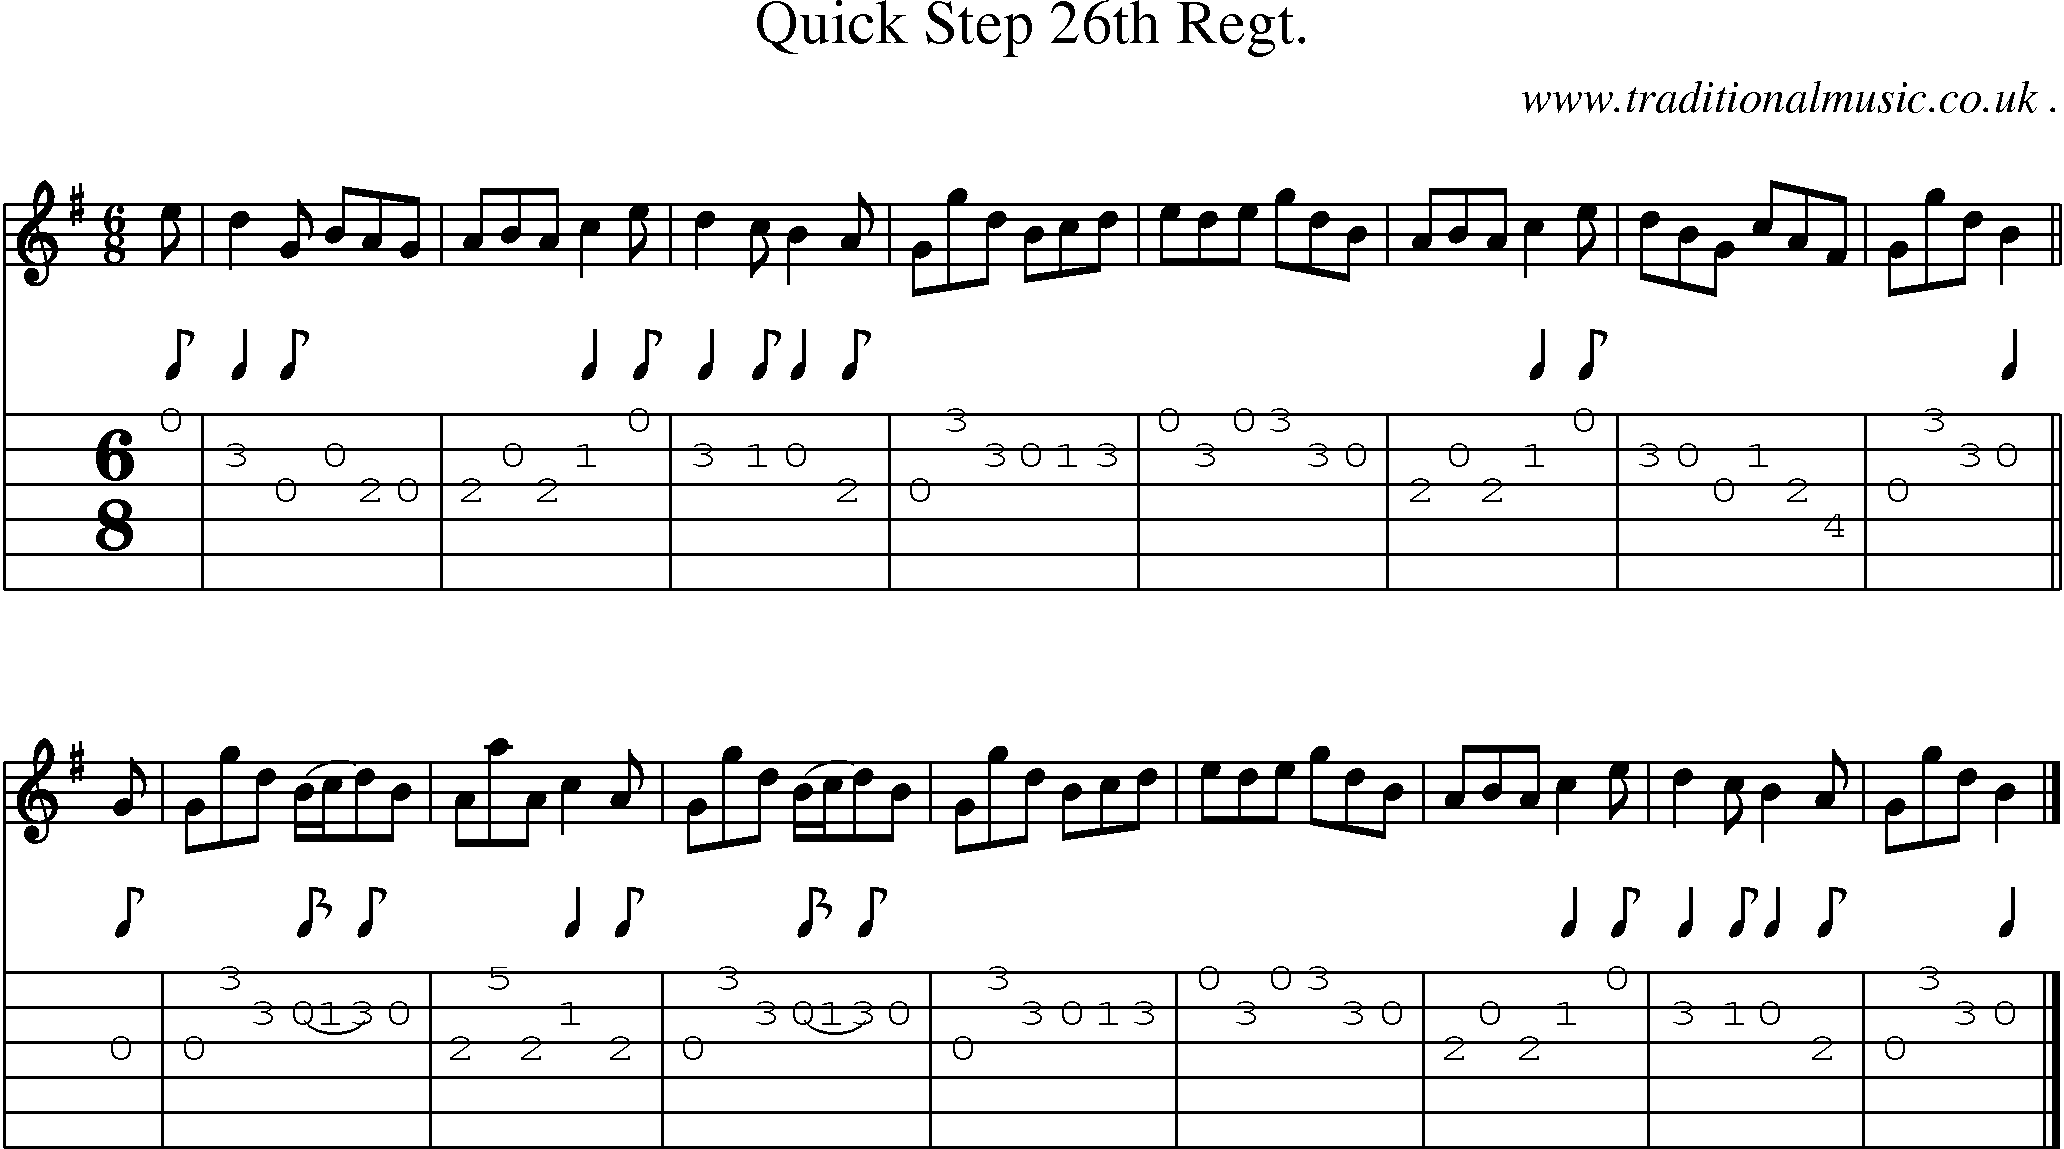 Sheet-music  score, Chords and Guitar Tabs for Quick Step 26th Regt